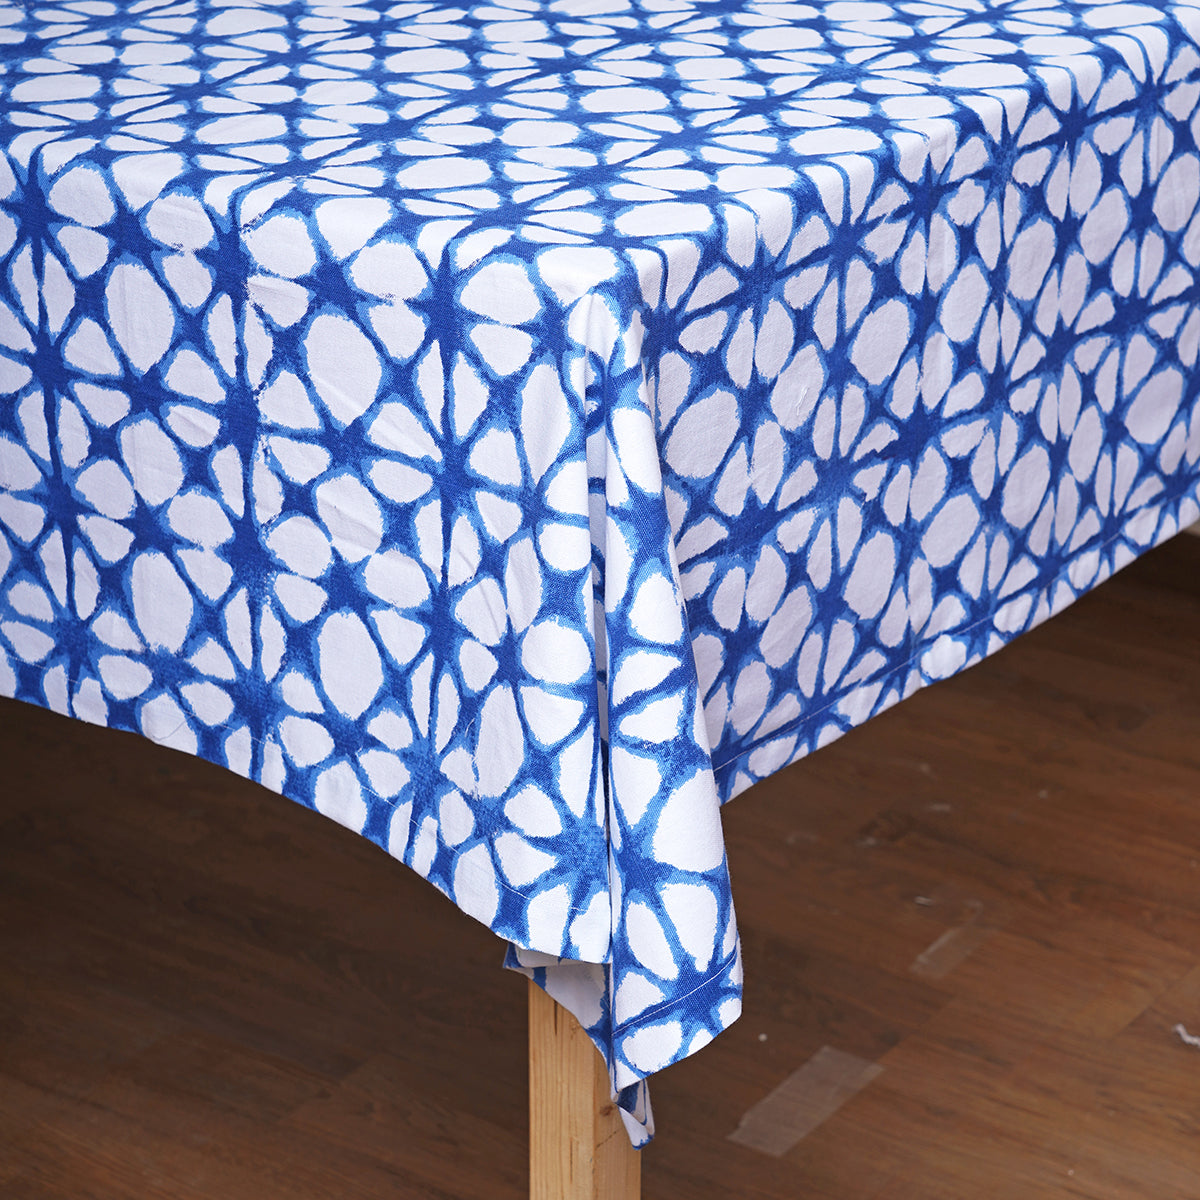 Tie dye print Table cloth, Blue and white colour, cotton, sizes available